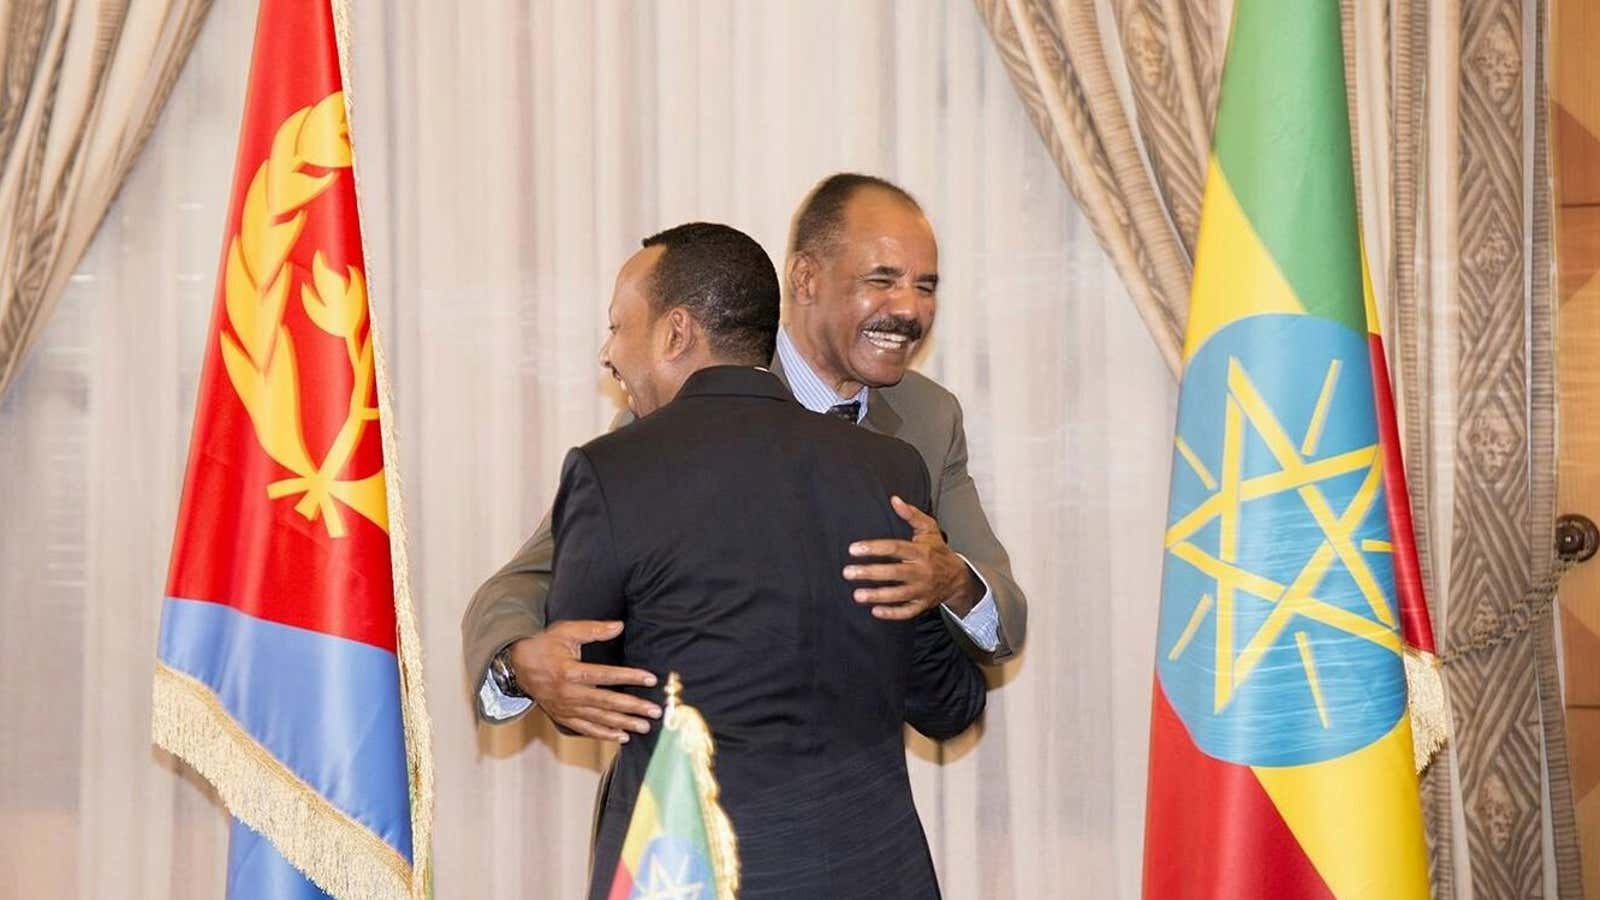 Ethiopia’s prime minister Abiy Ahmed and Eritrean president Isaias Afwerk embrace at the declaration signing in Asmara, Eritrea July 9, 2018